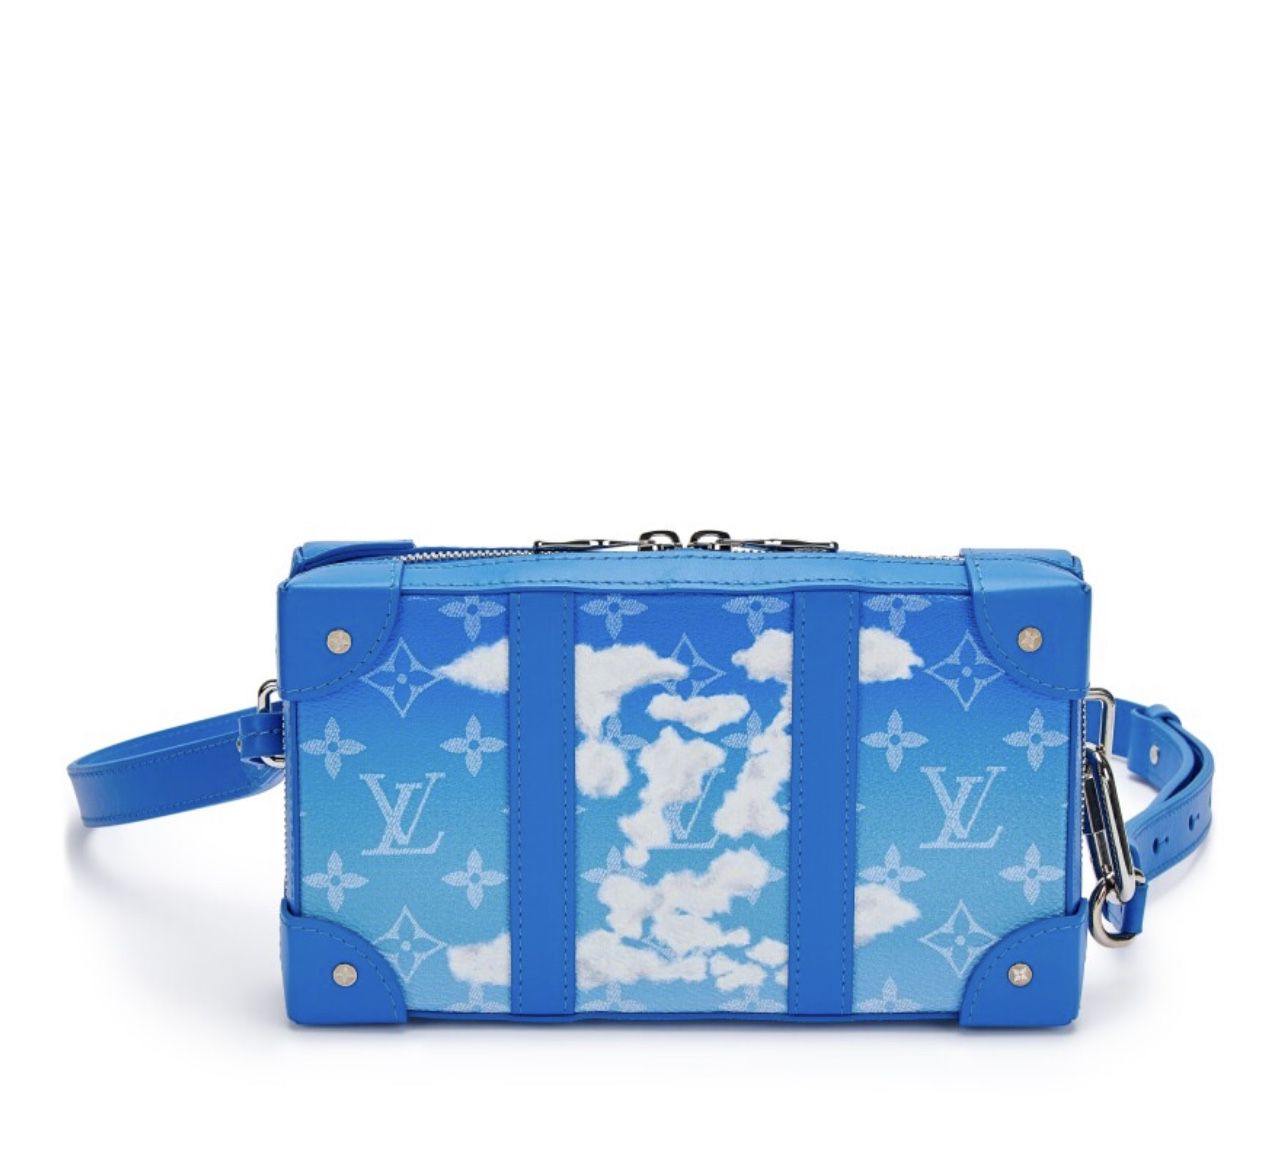 Louis Vuitton Virgil Abloh Blue Monogram Clouds Coated Canvas Soft Trunk  Wallet Silver Hardware, 2020 for Sale in New York, NY - OfferUp